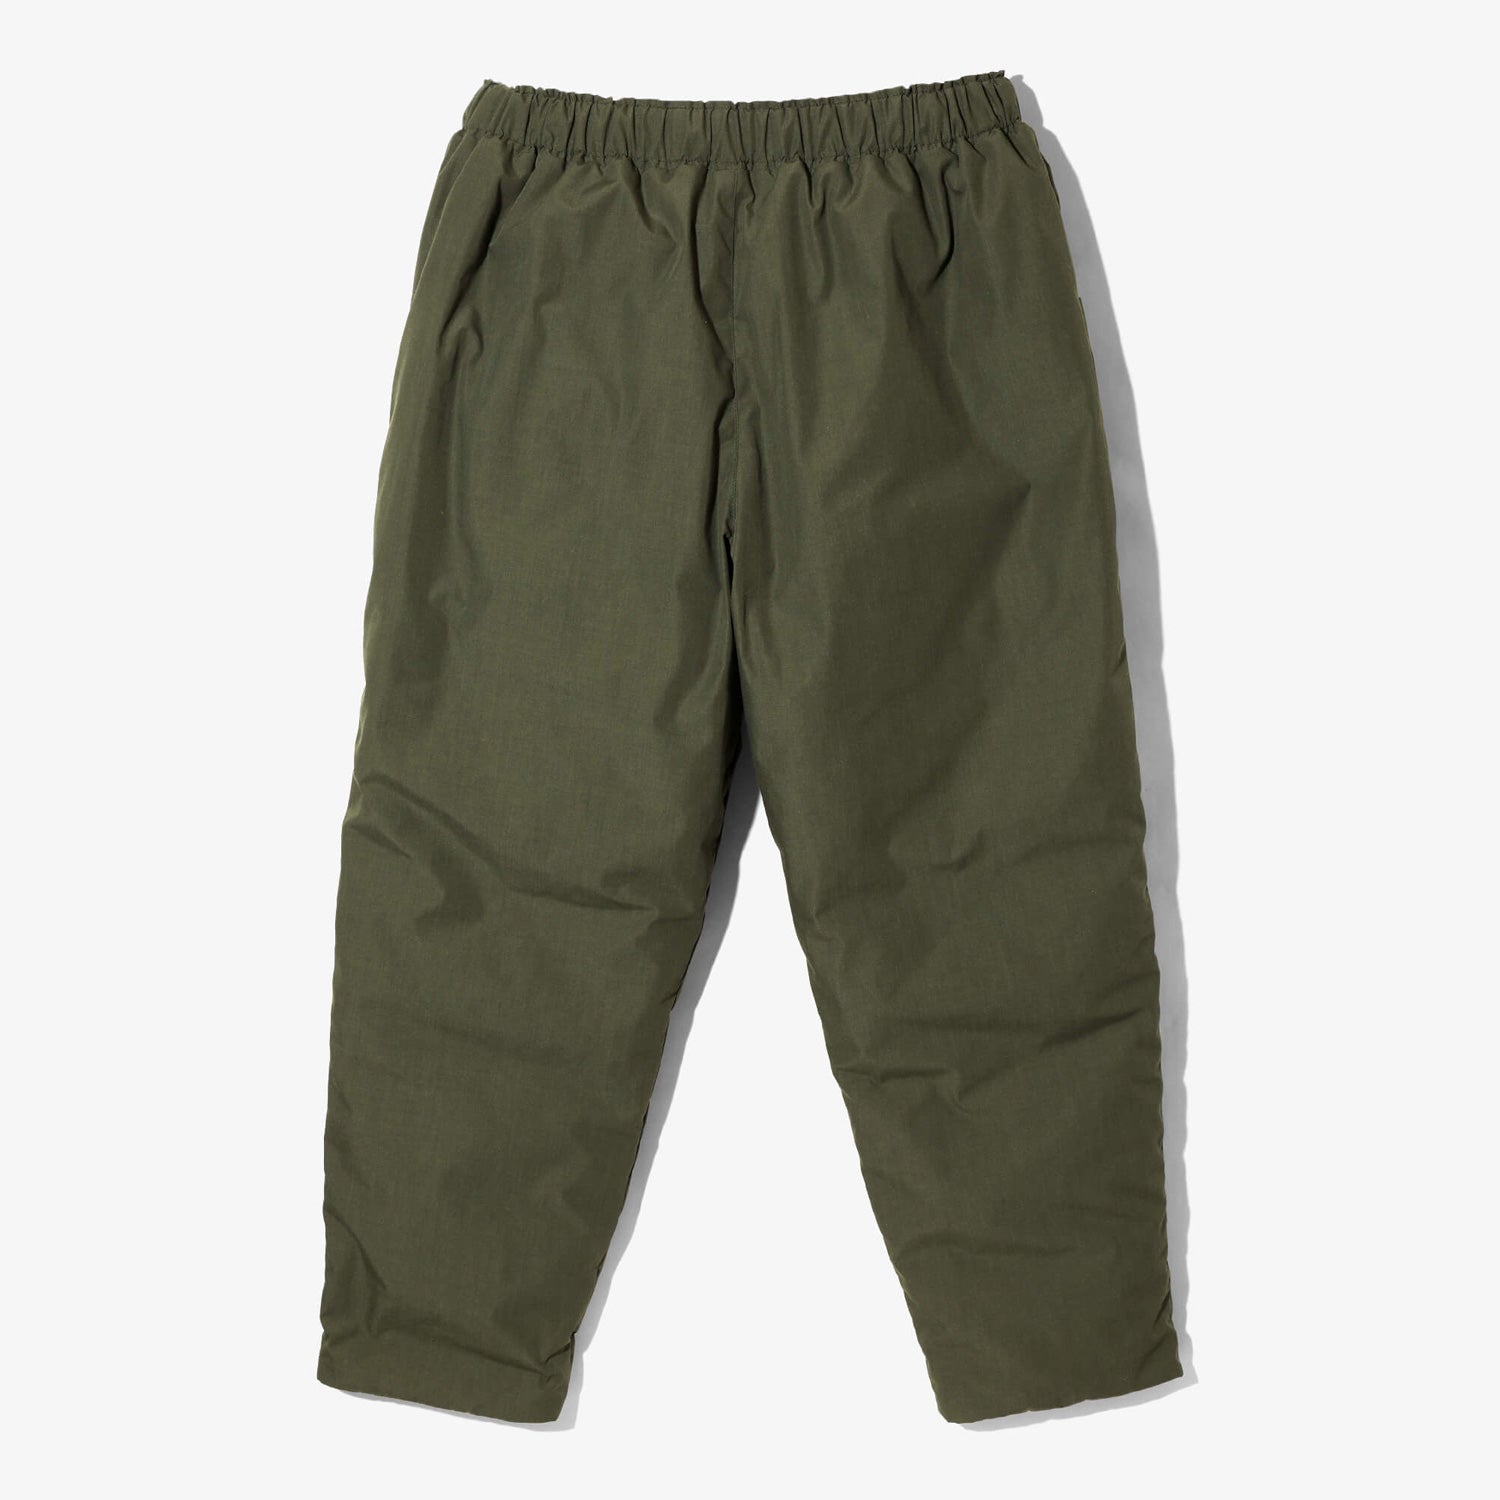 SOUTH2 WEST8×NANGA BELTED C.S. DOWN PANTS - FLAME RESISTANT 